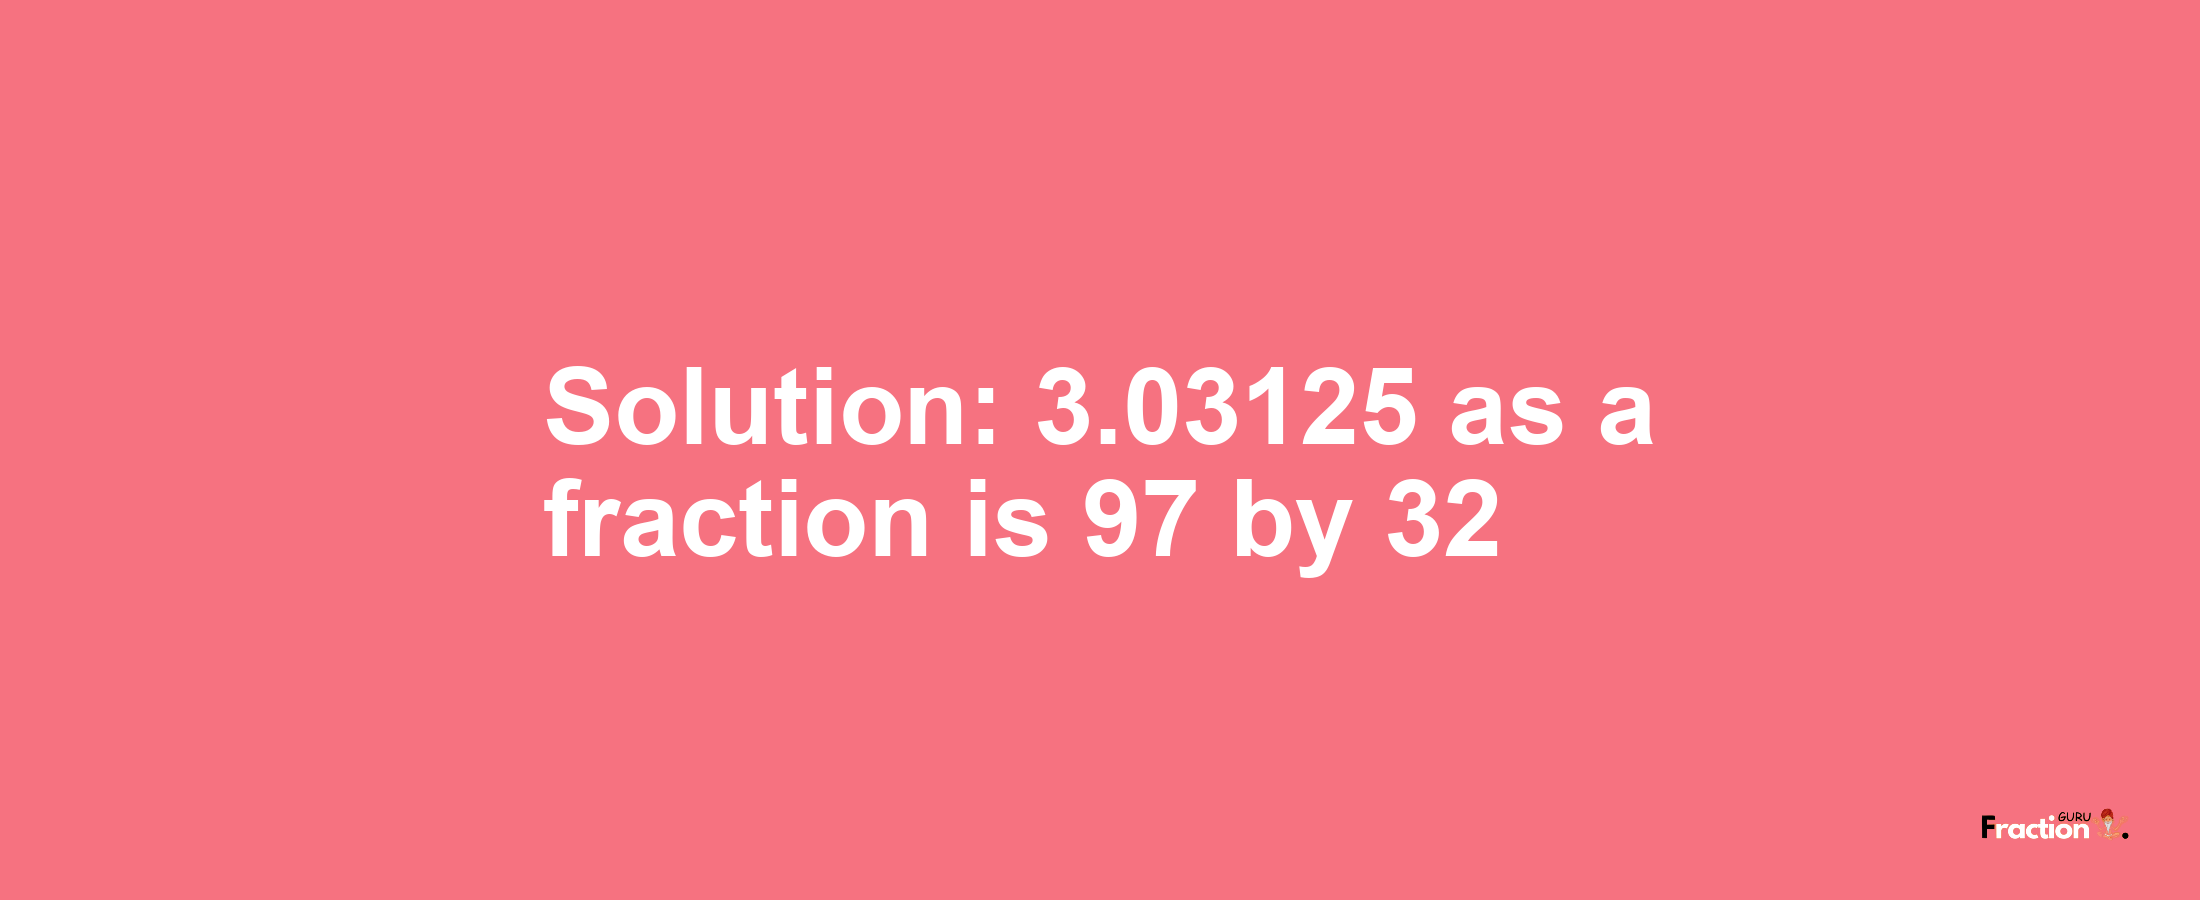 Solution:3.03125 as a fraction is 97/32